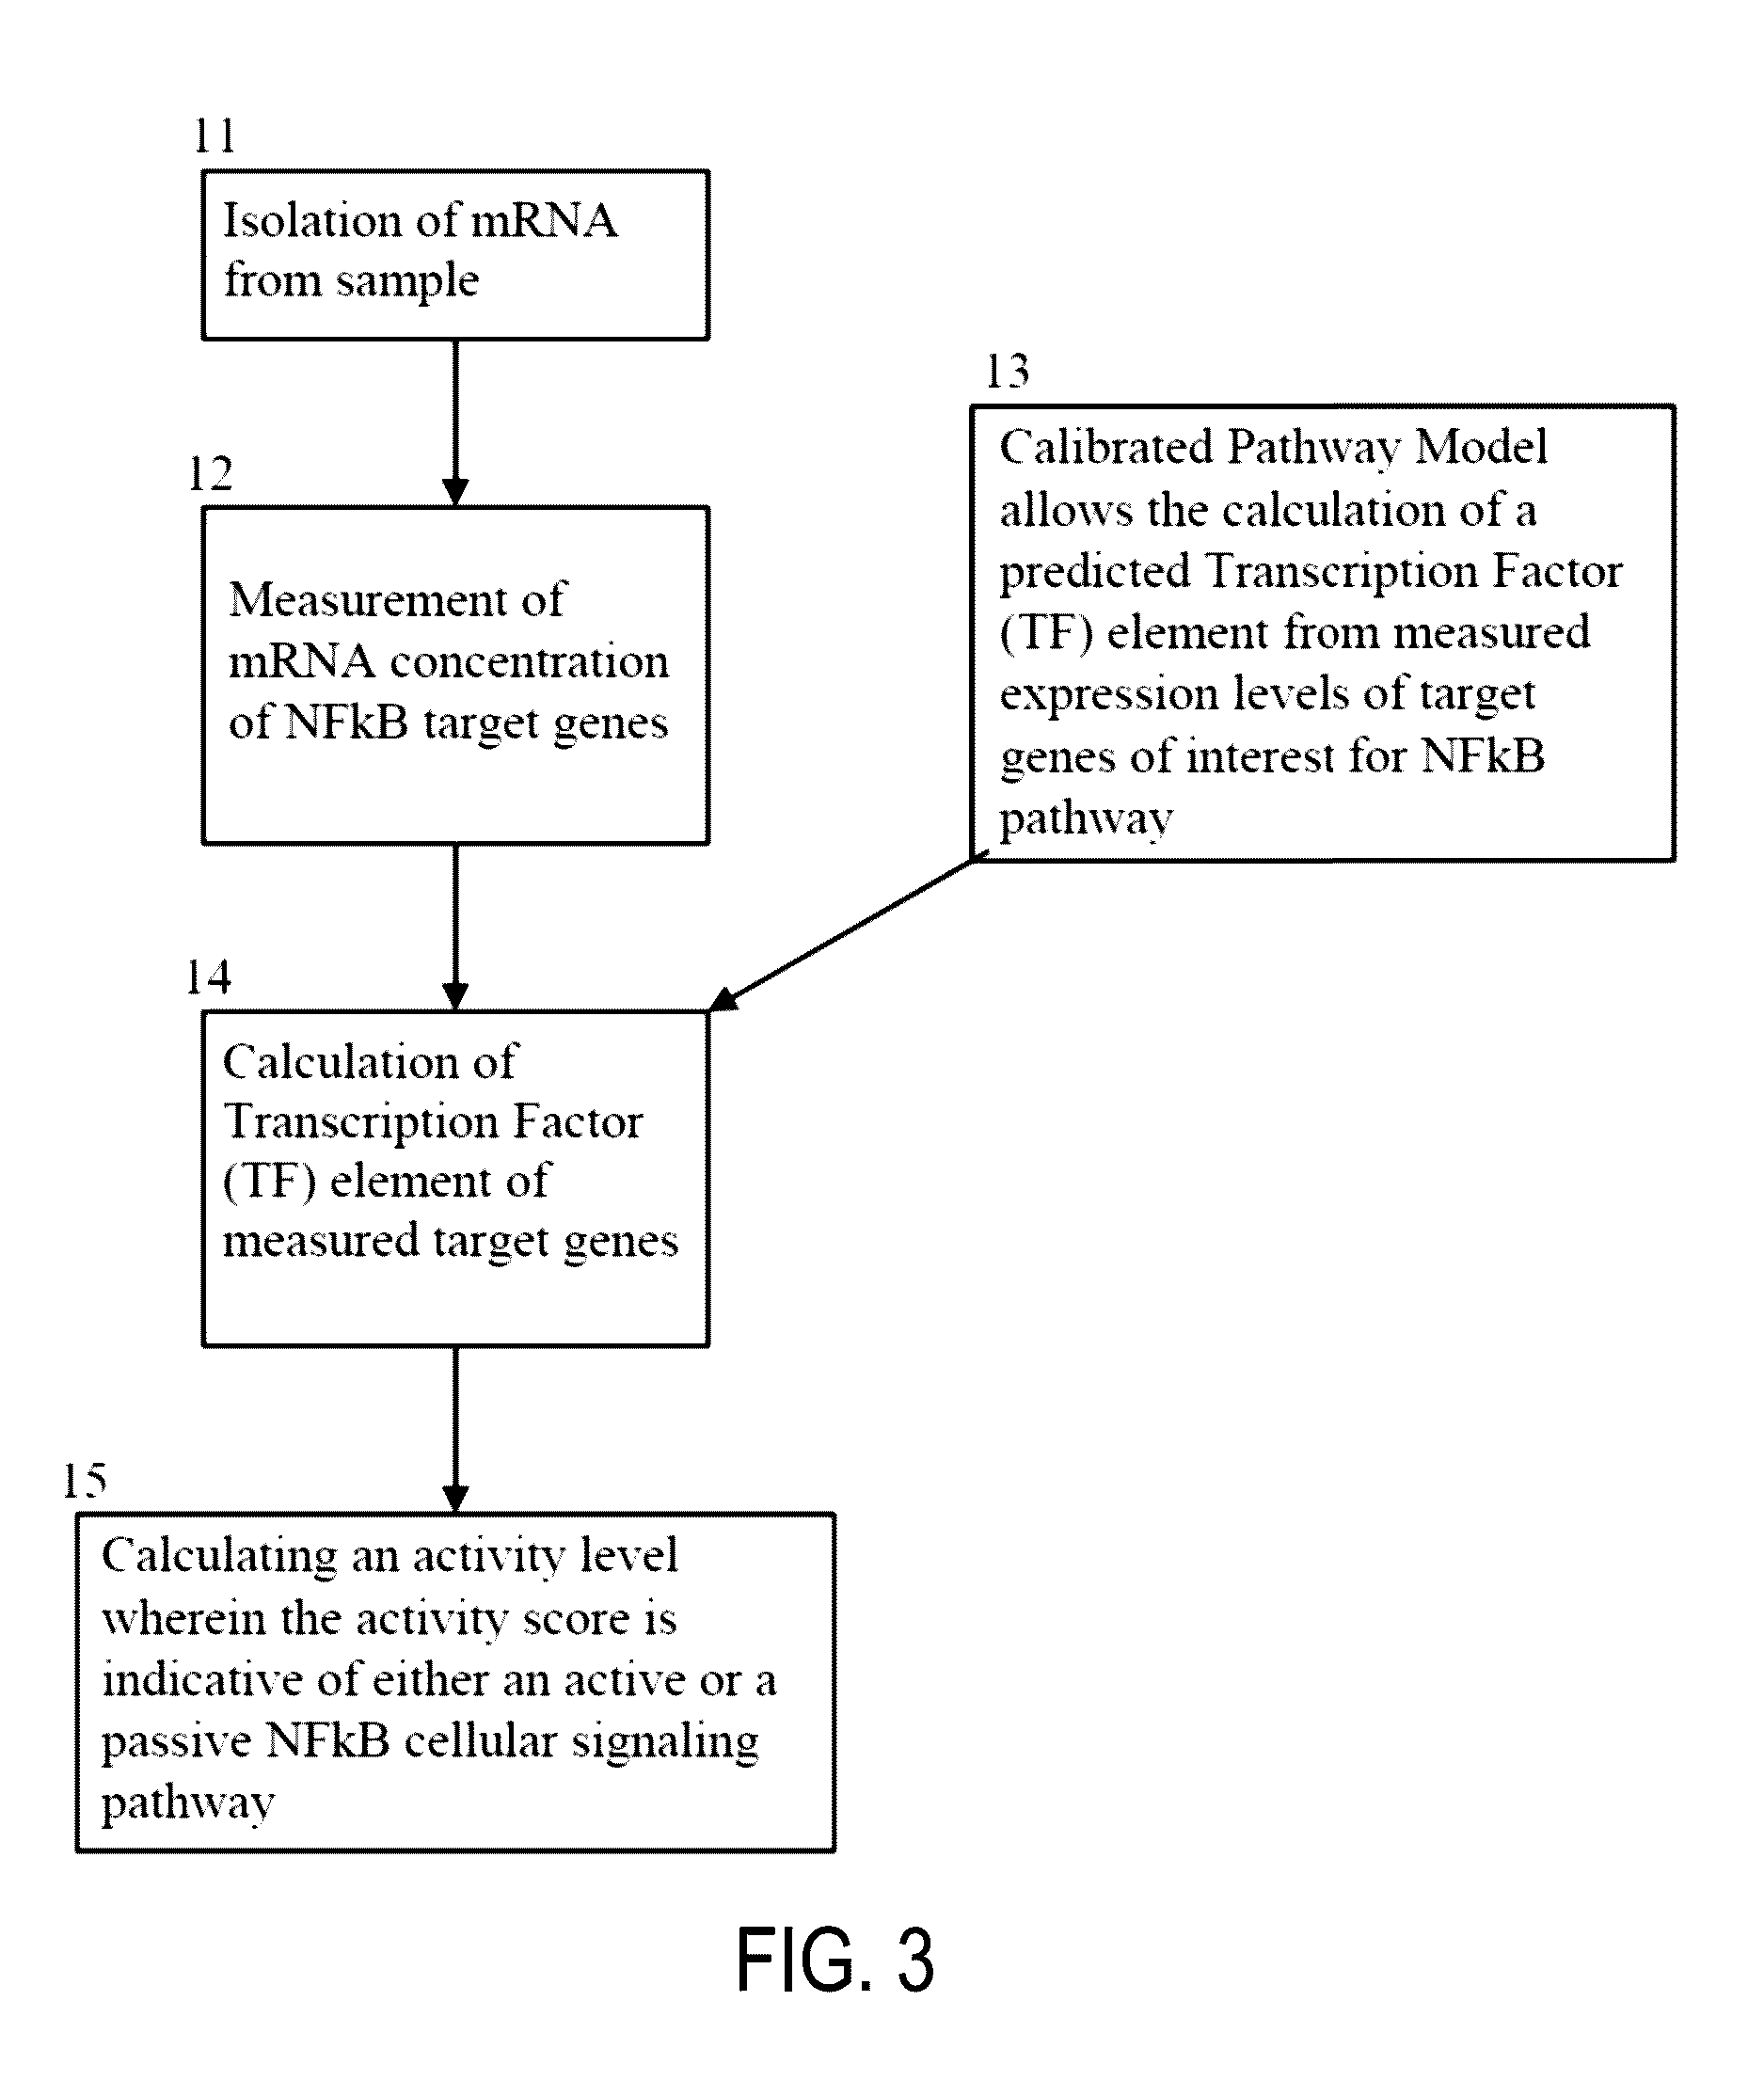 DETERMINATION OF NFkB PATHWAY ACTIVITY USING UNIQUE COMBINATION OF TARGET GENES